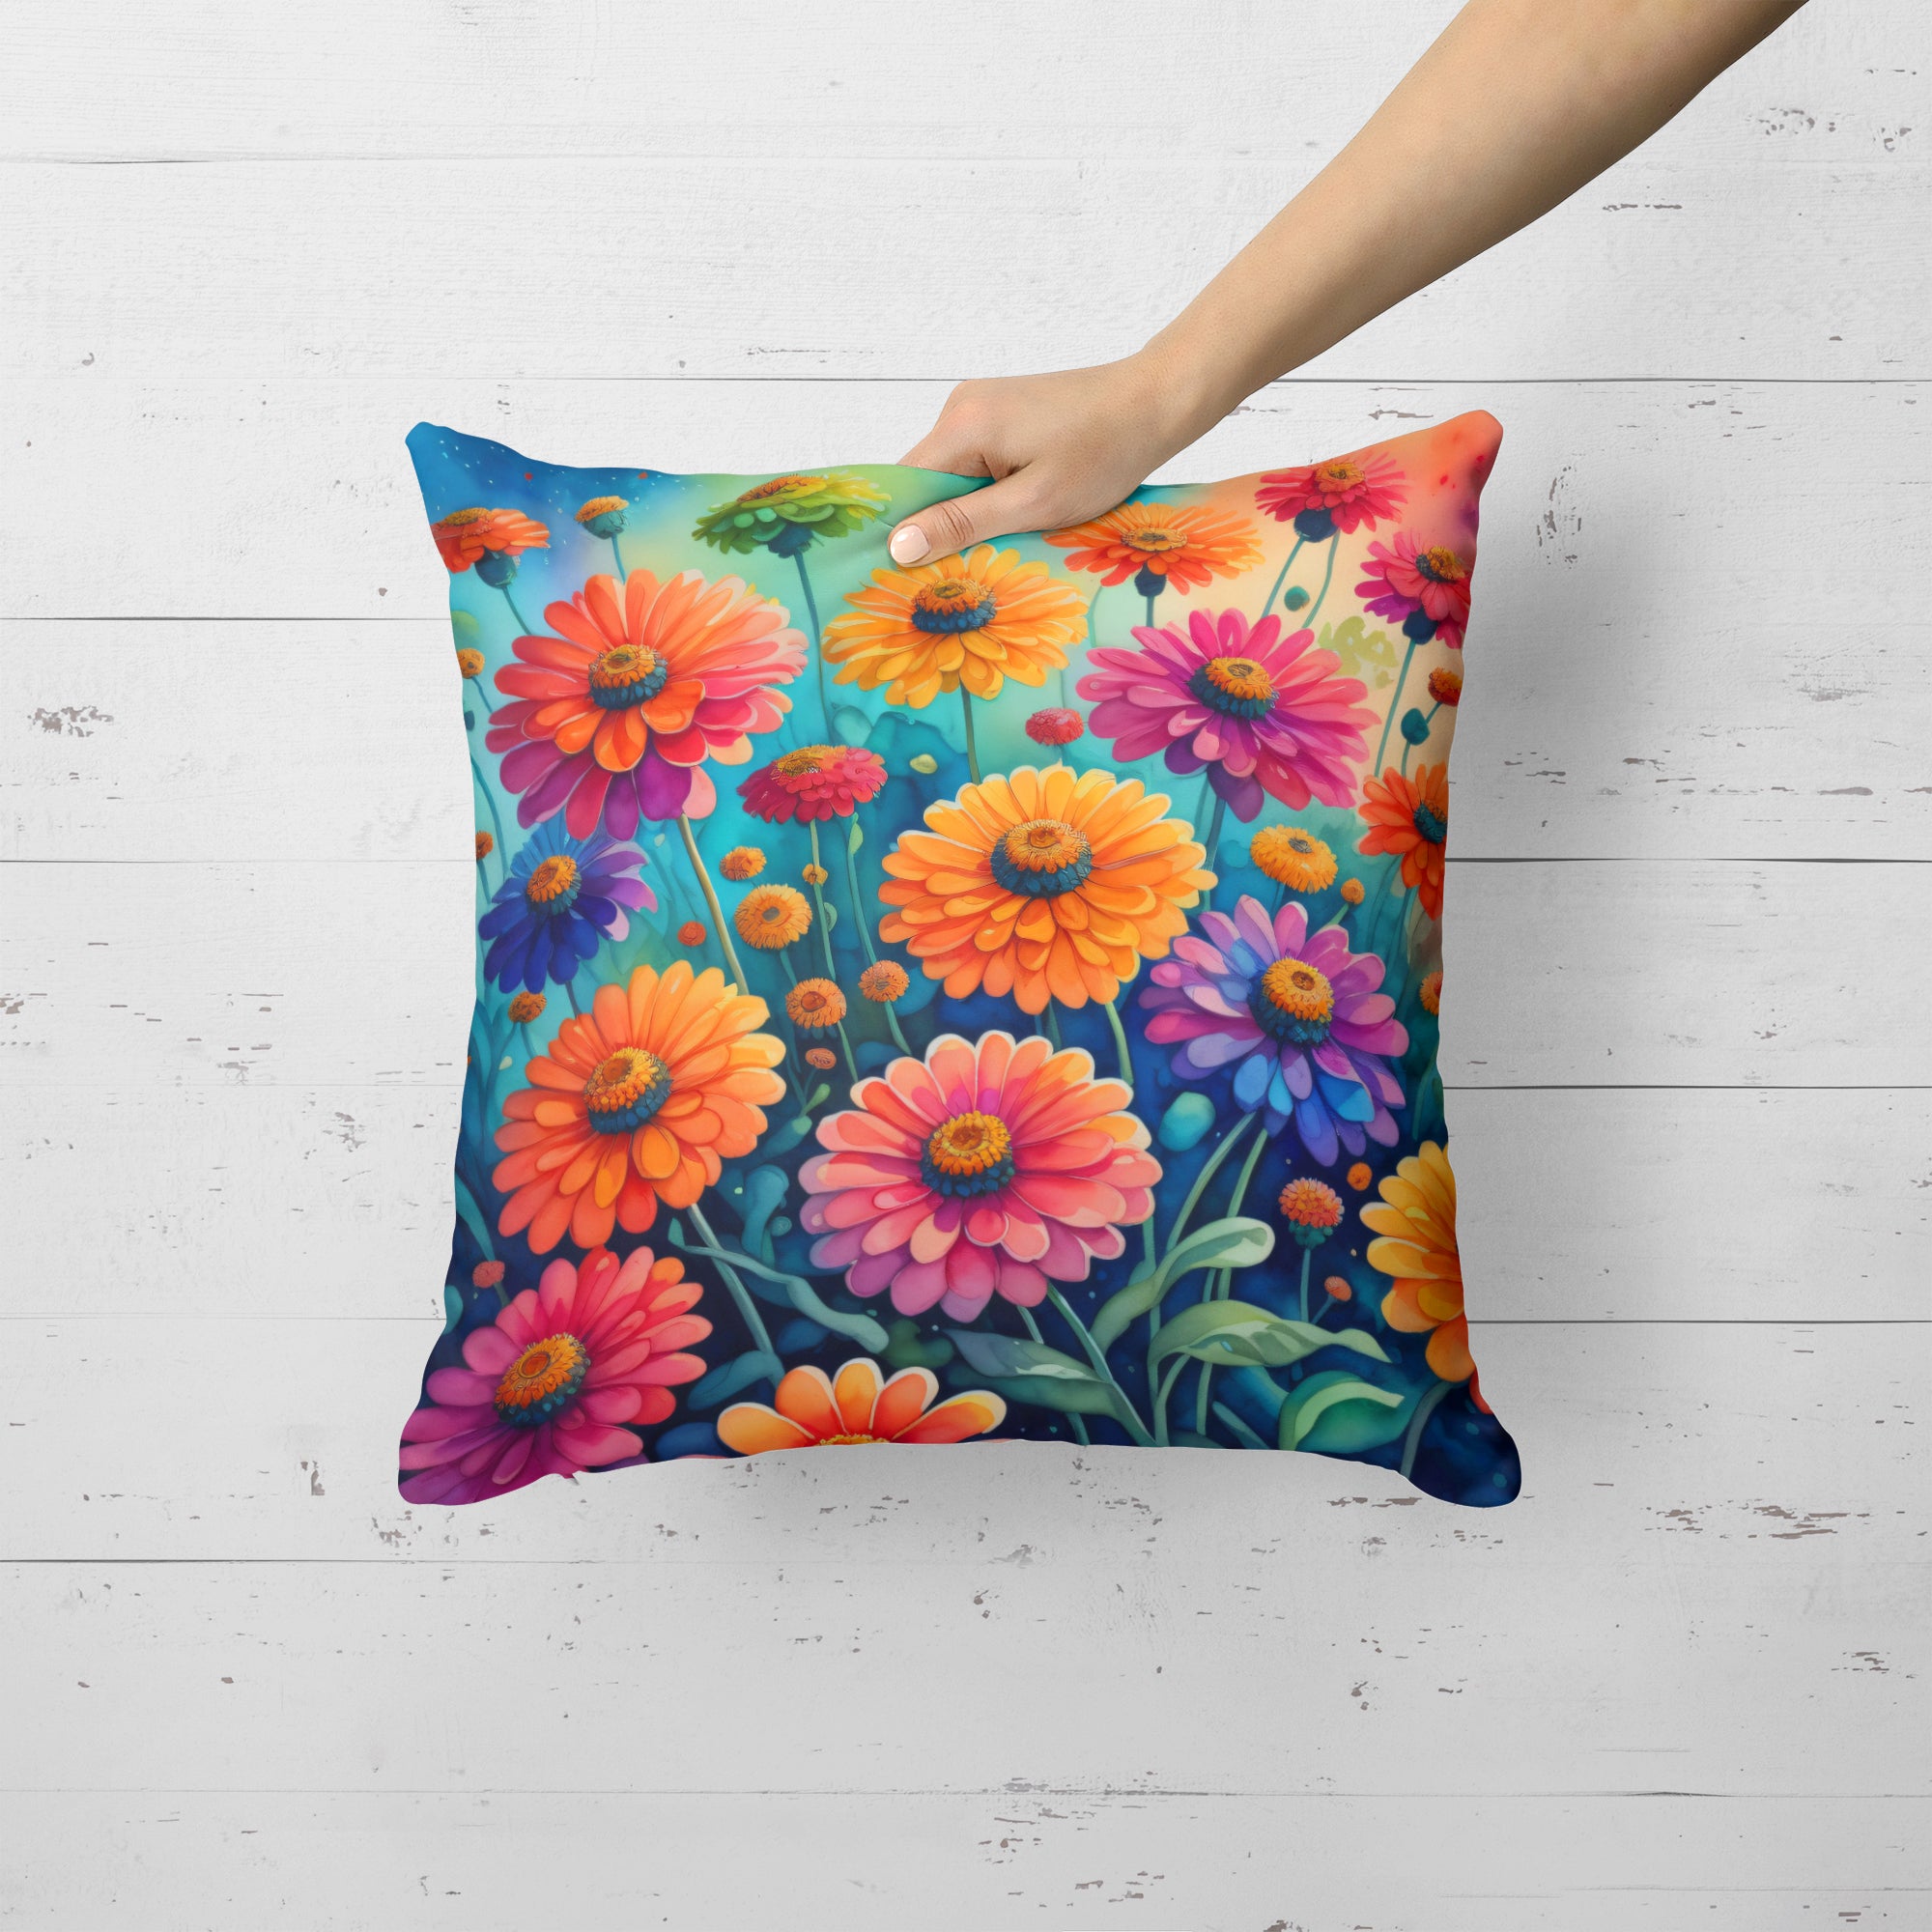 Buy this Colorful Zinnias Fabric Decorative Pillow